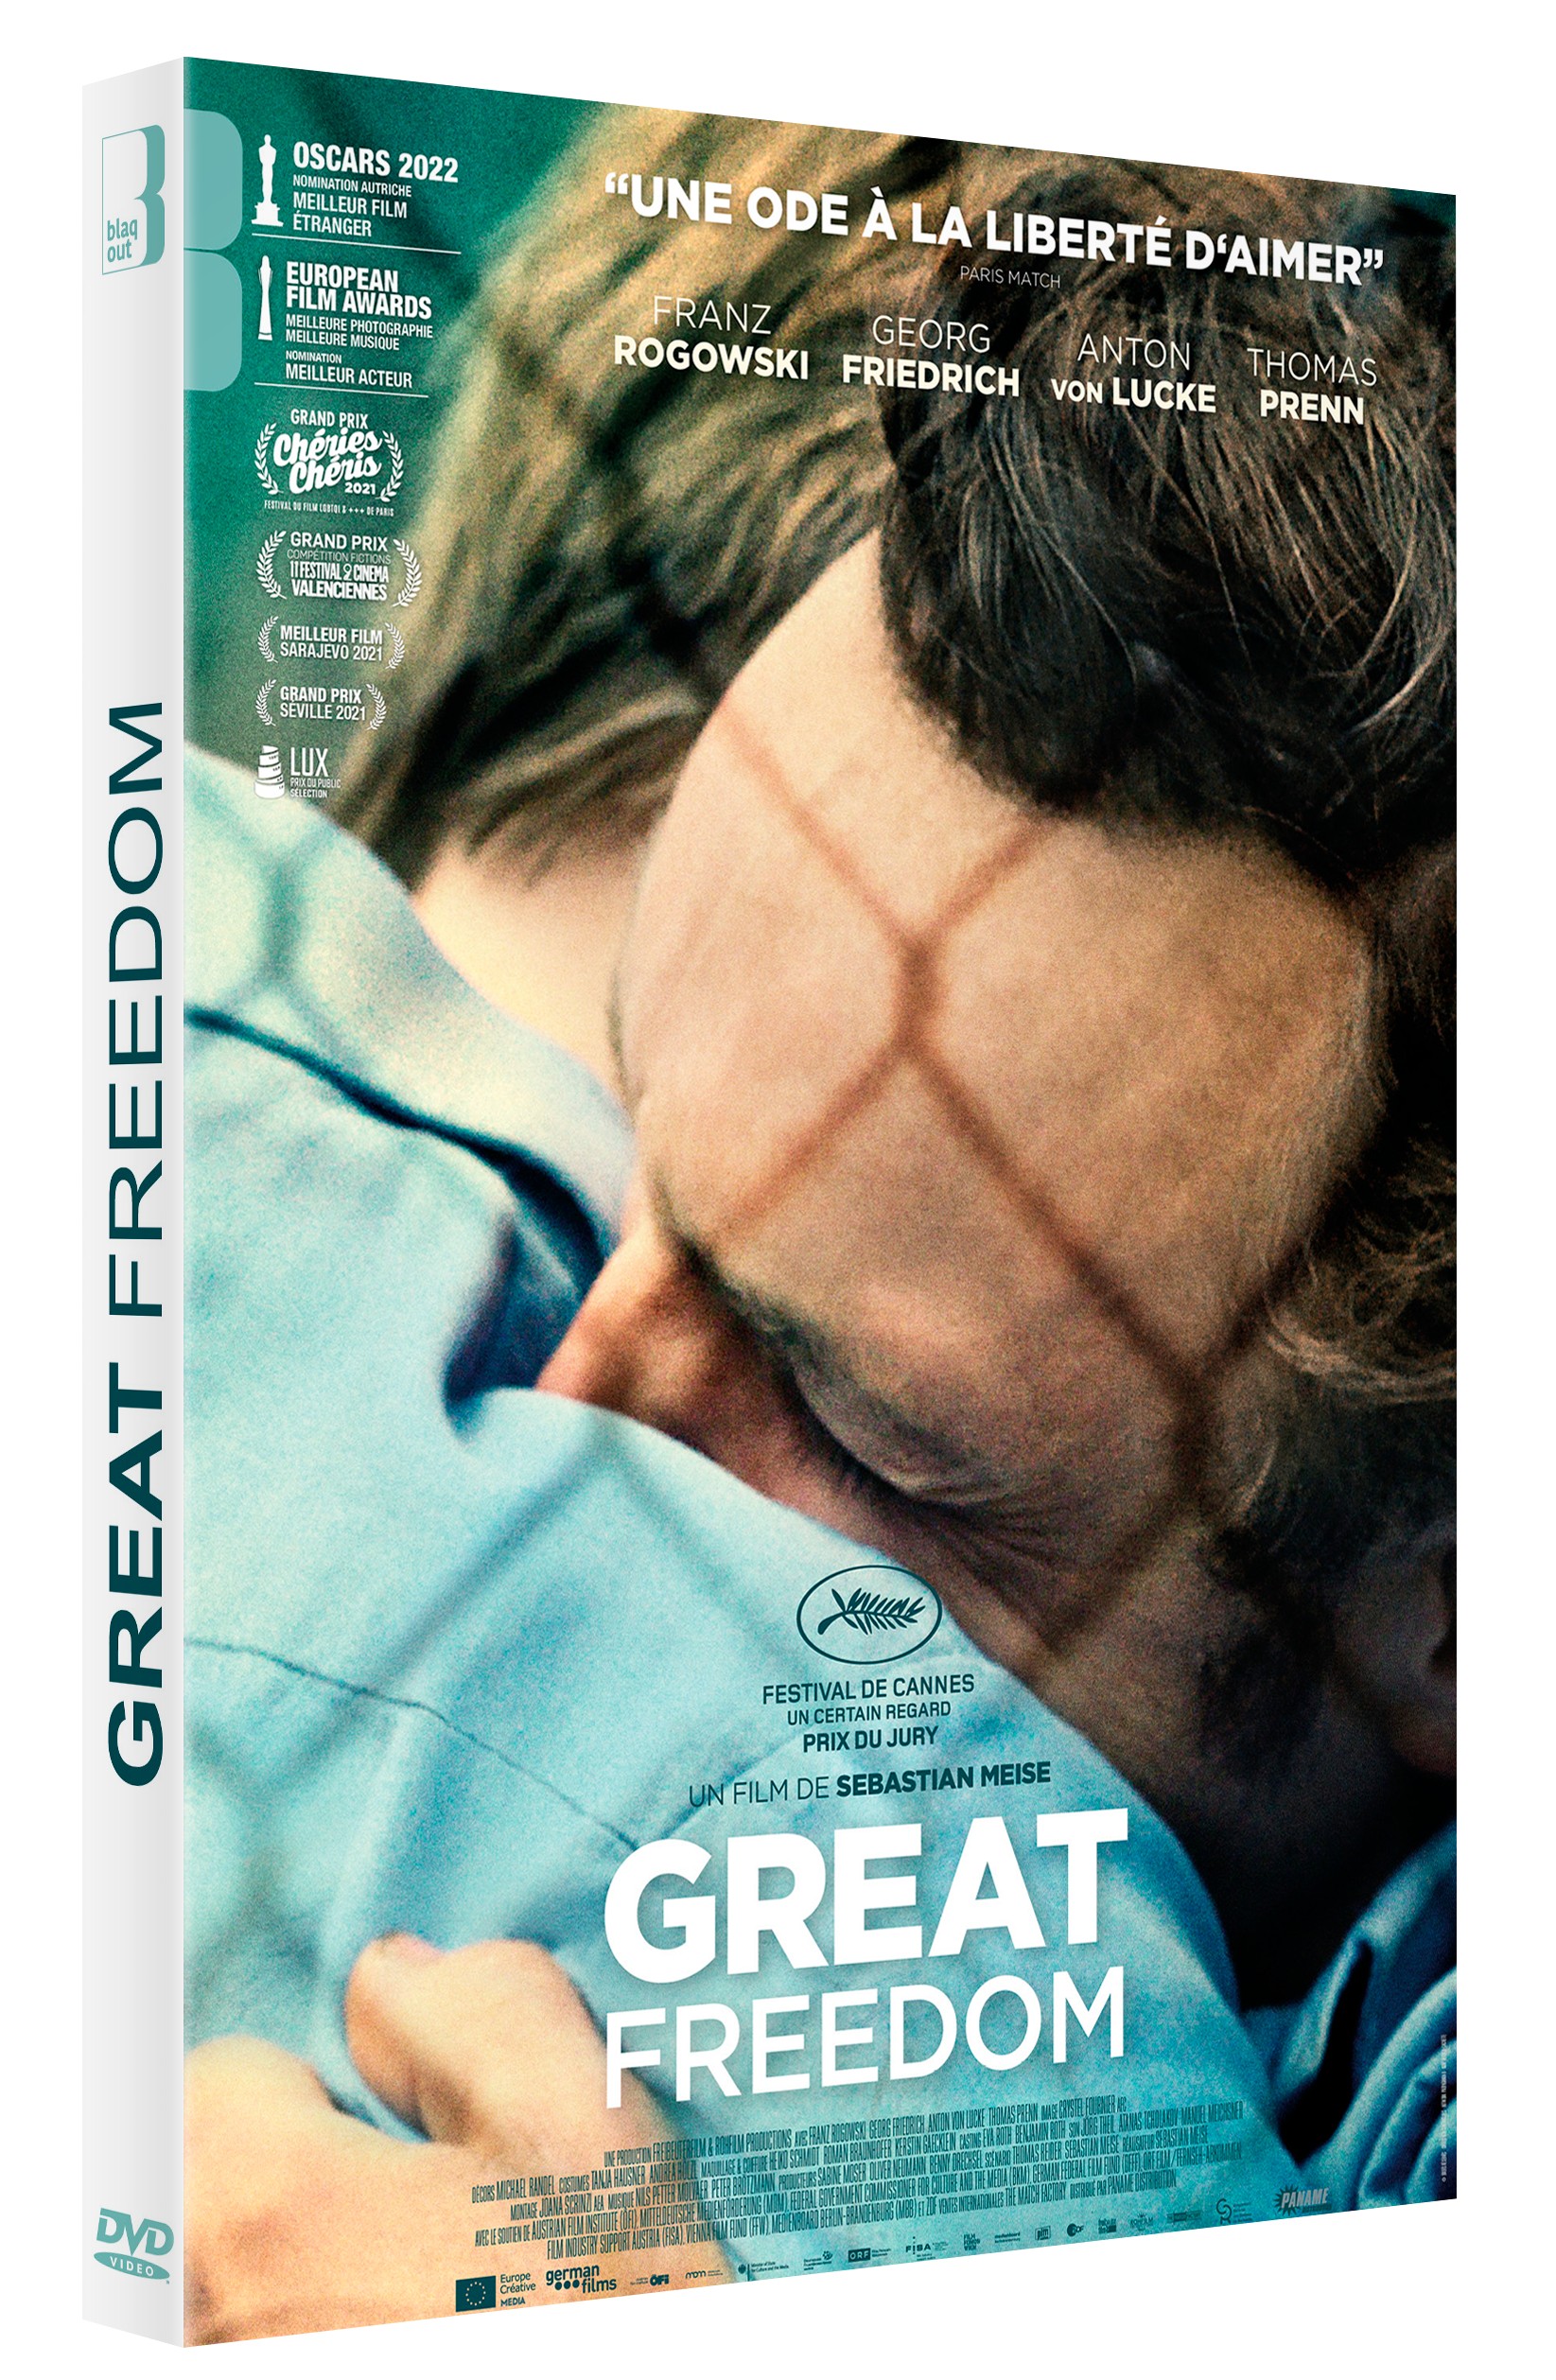 GREAT FREEDOM - DVD